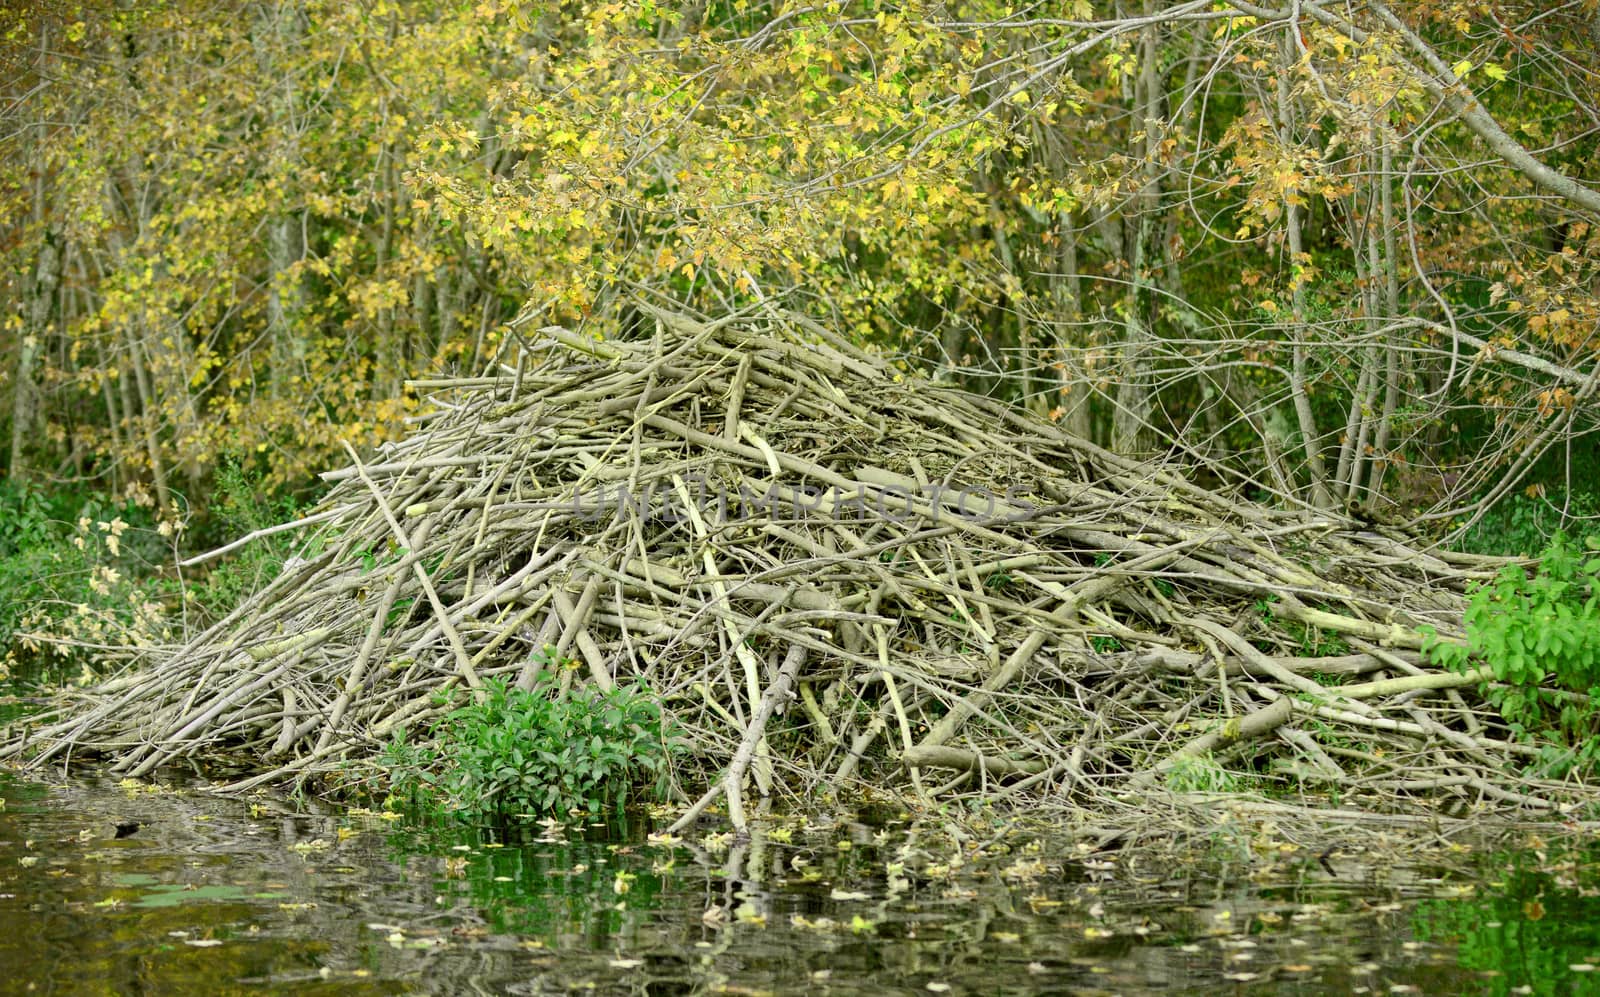 beaver dam in a spring forest by ftlaudgirl